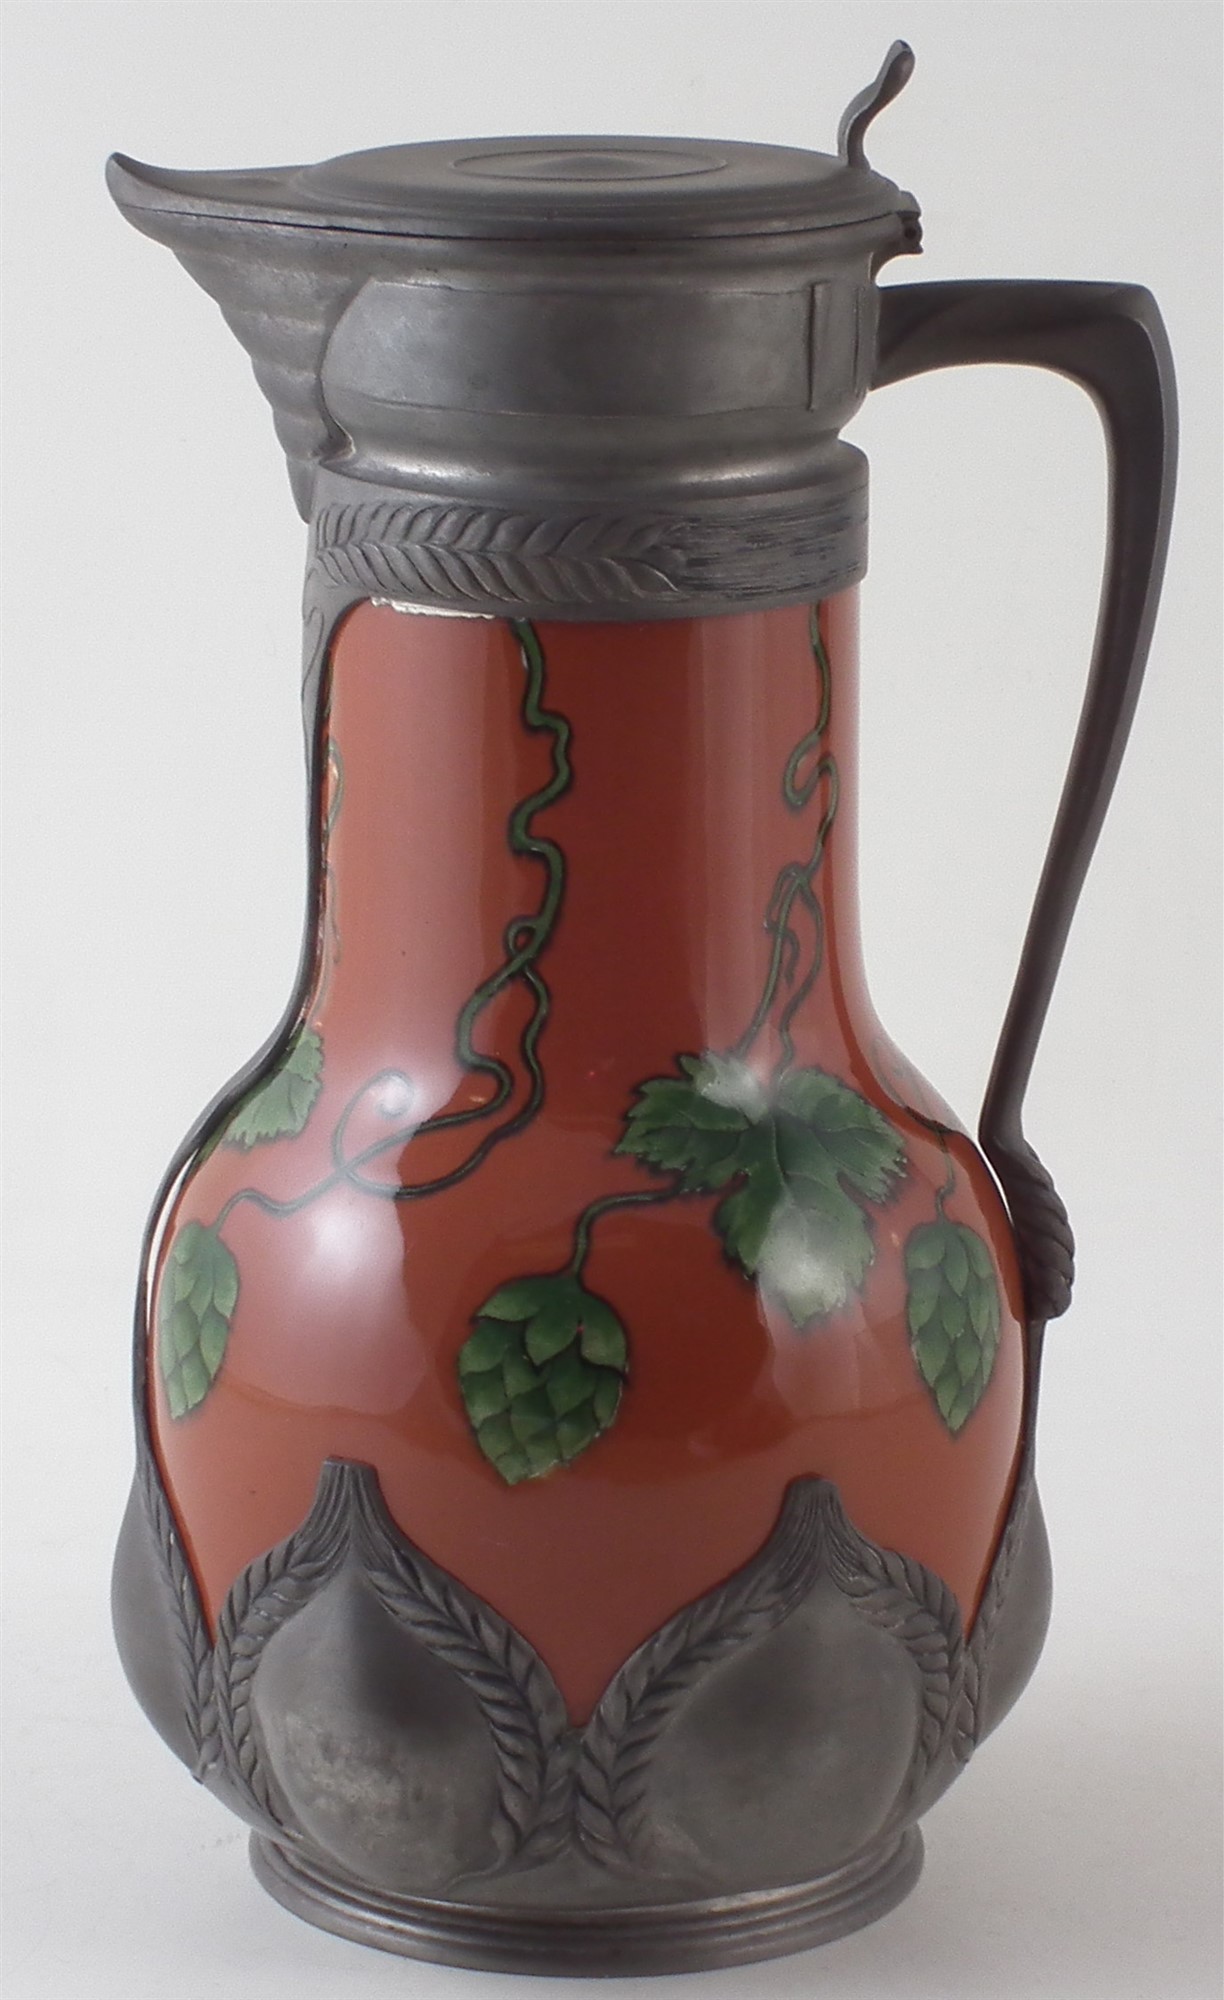 Villeroy and Boch orivit pewter beer jug circa 1900 , decorated with hops, the pewter mount - Image 3 of 6